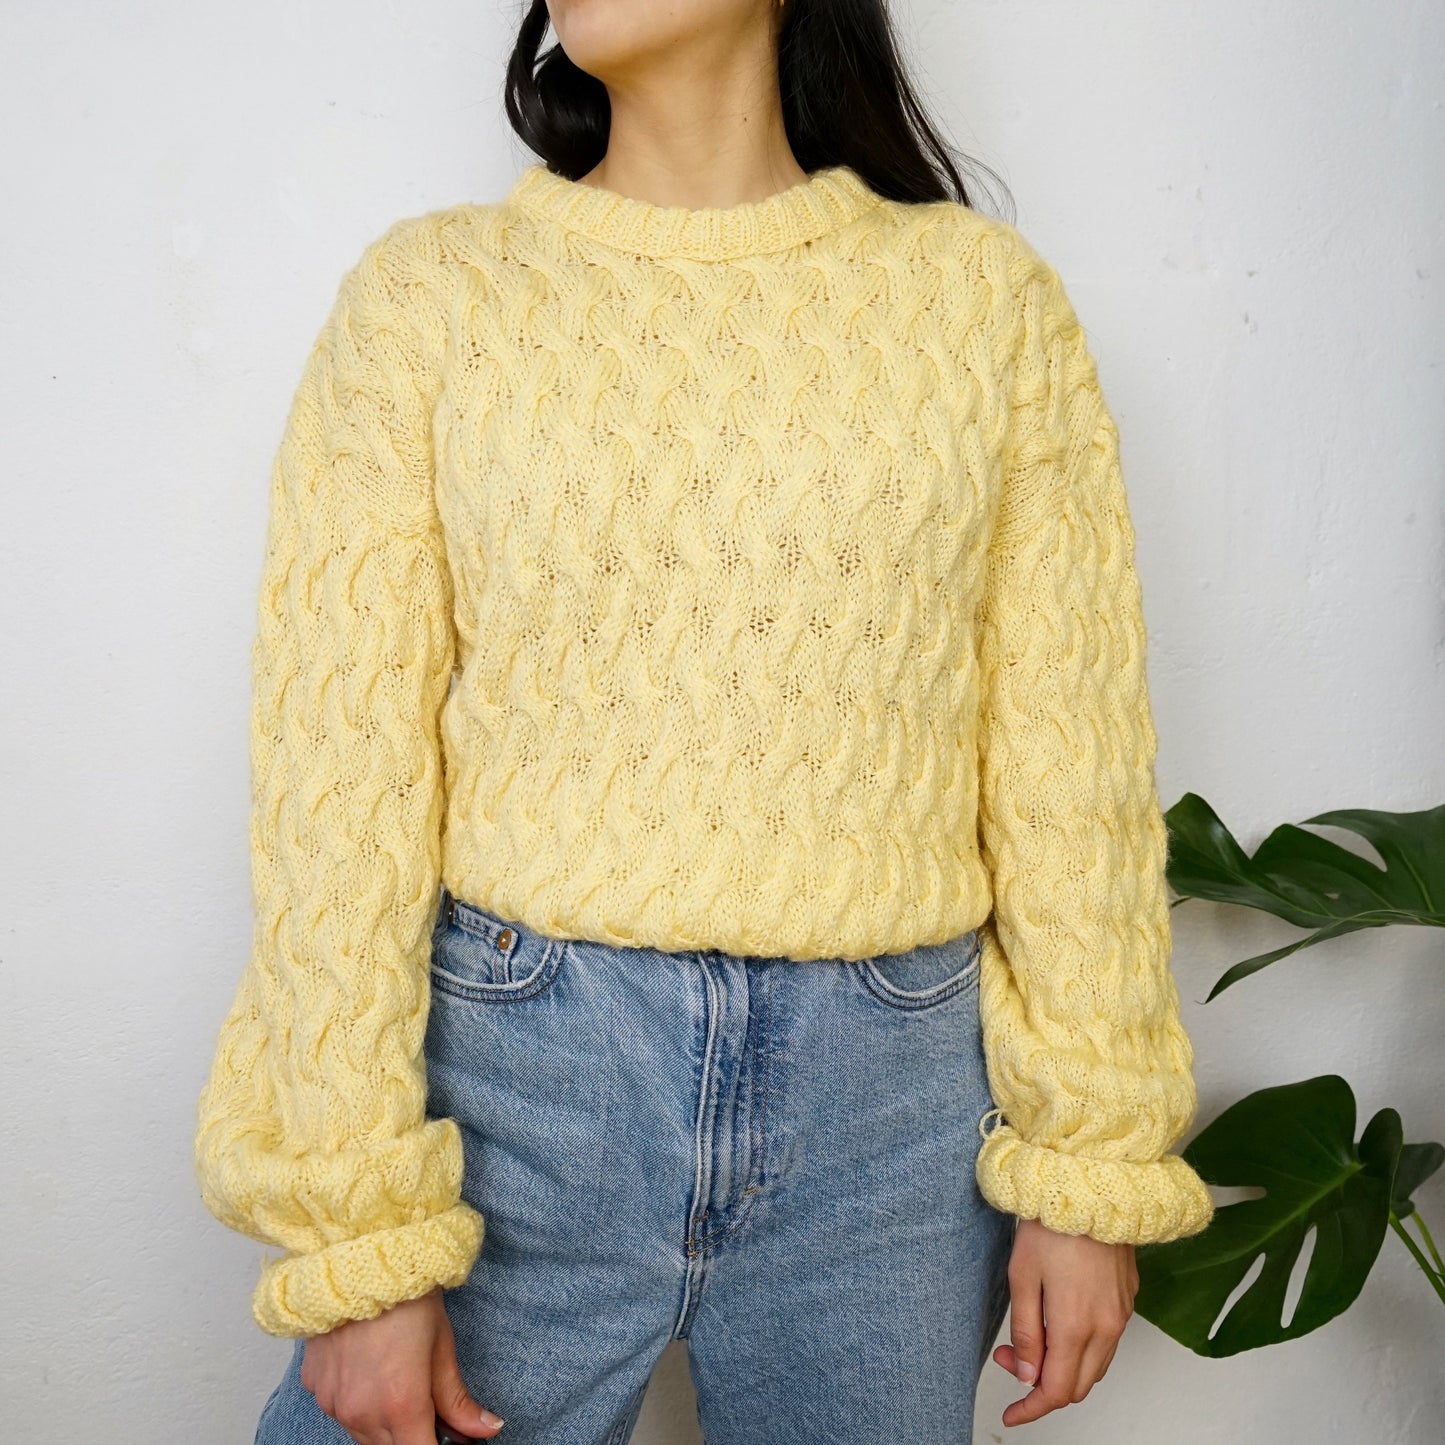 Vintage yellow Pullover Size L-XL braided pattern